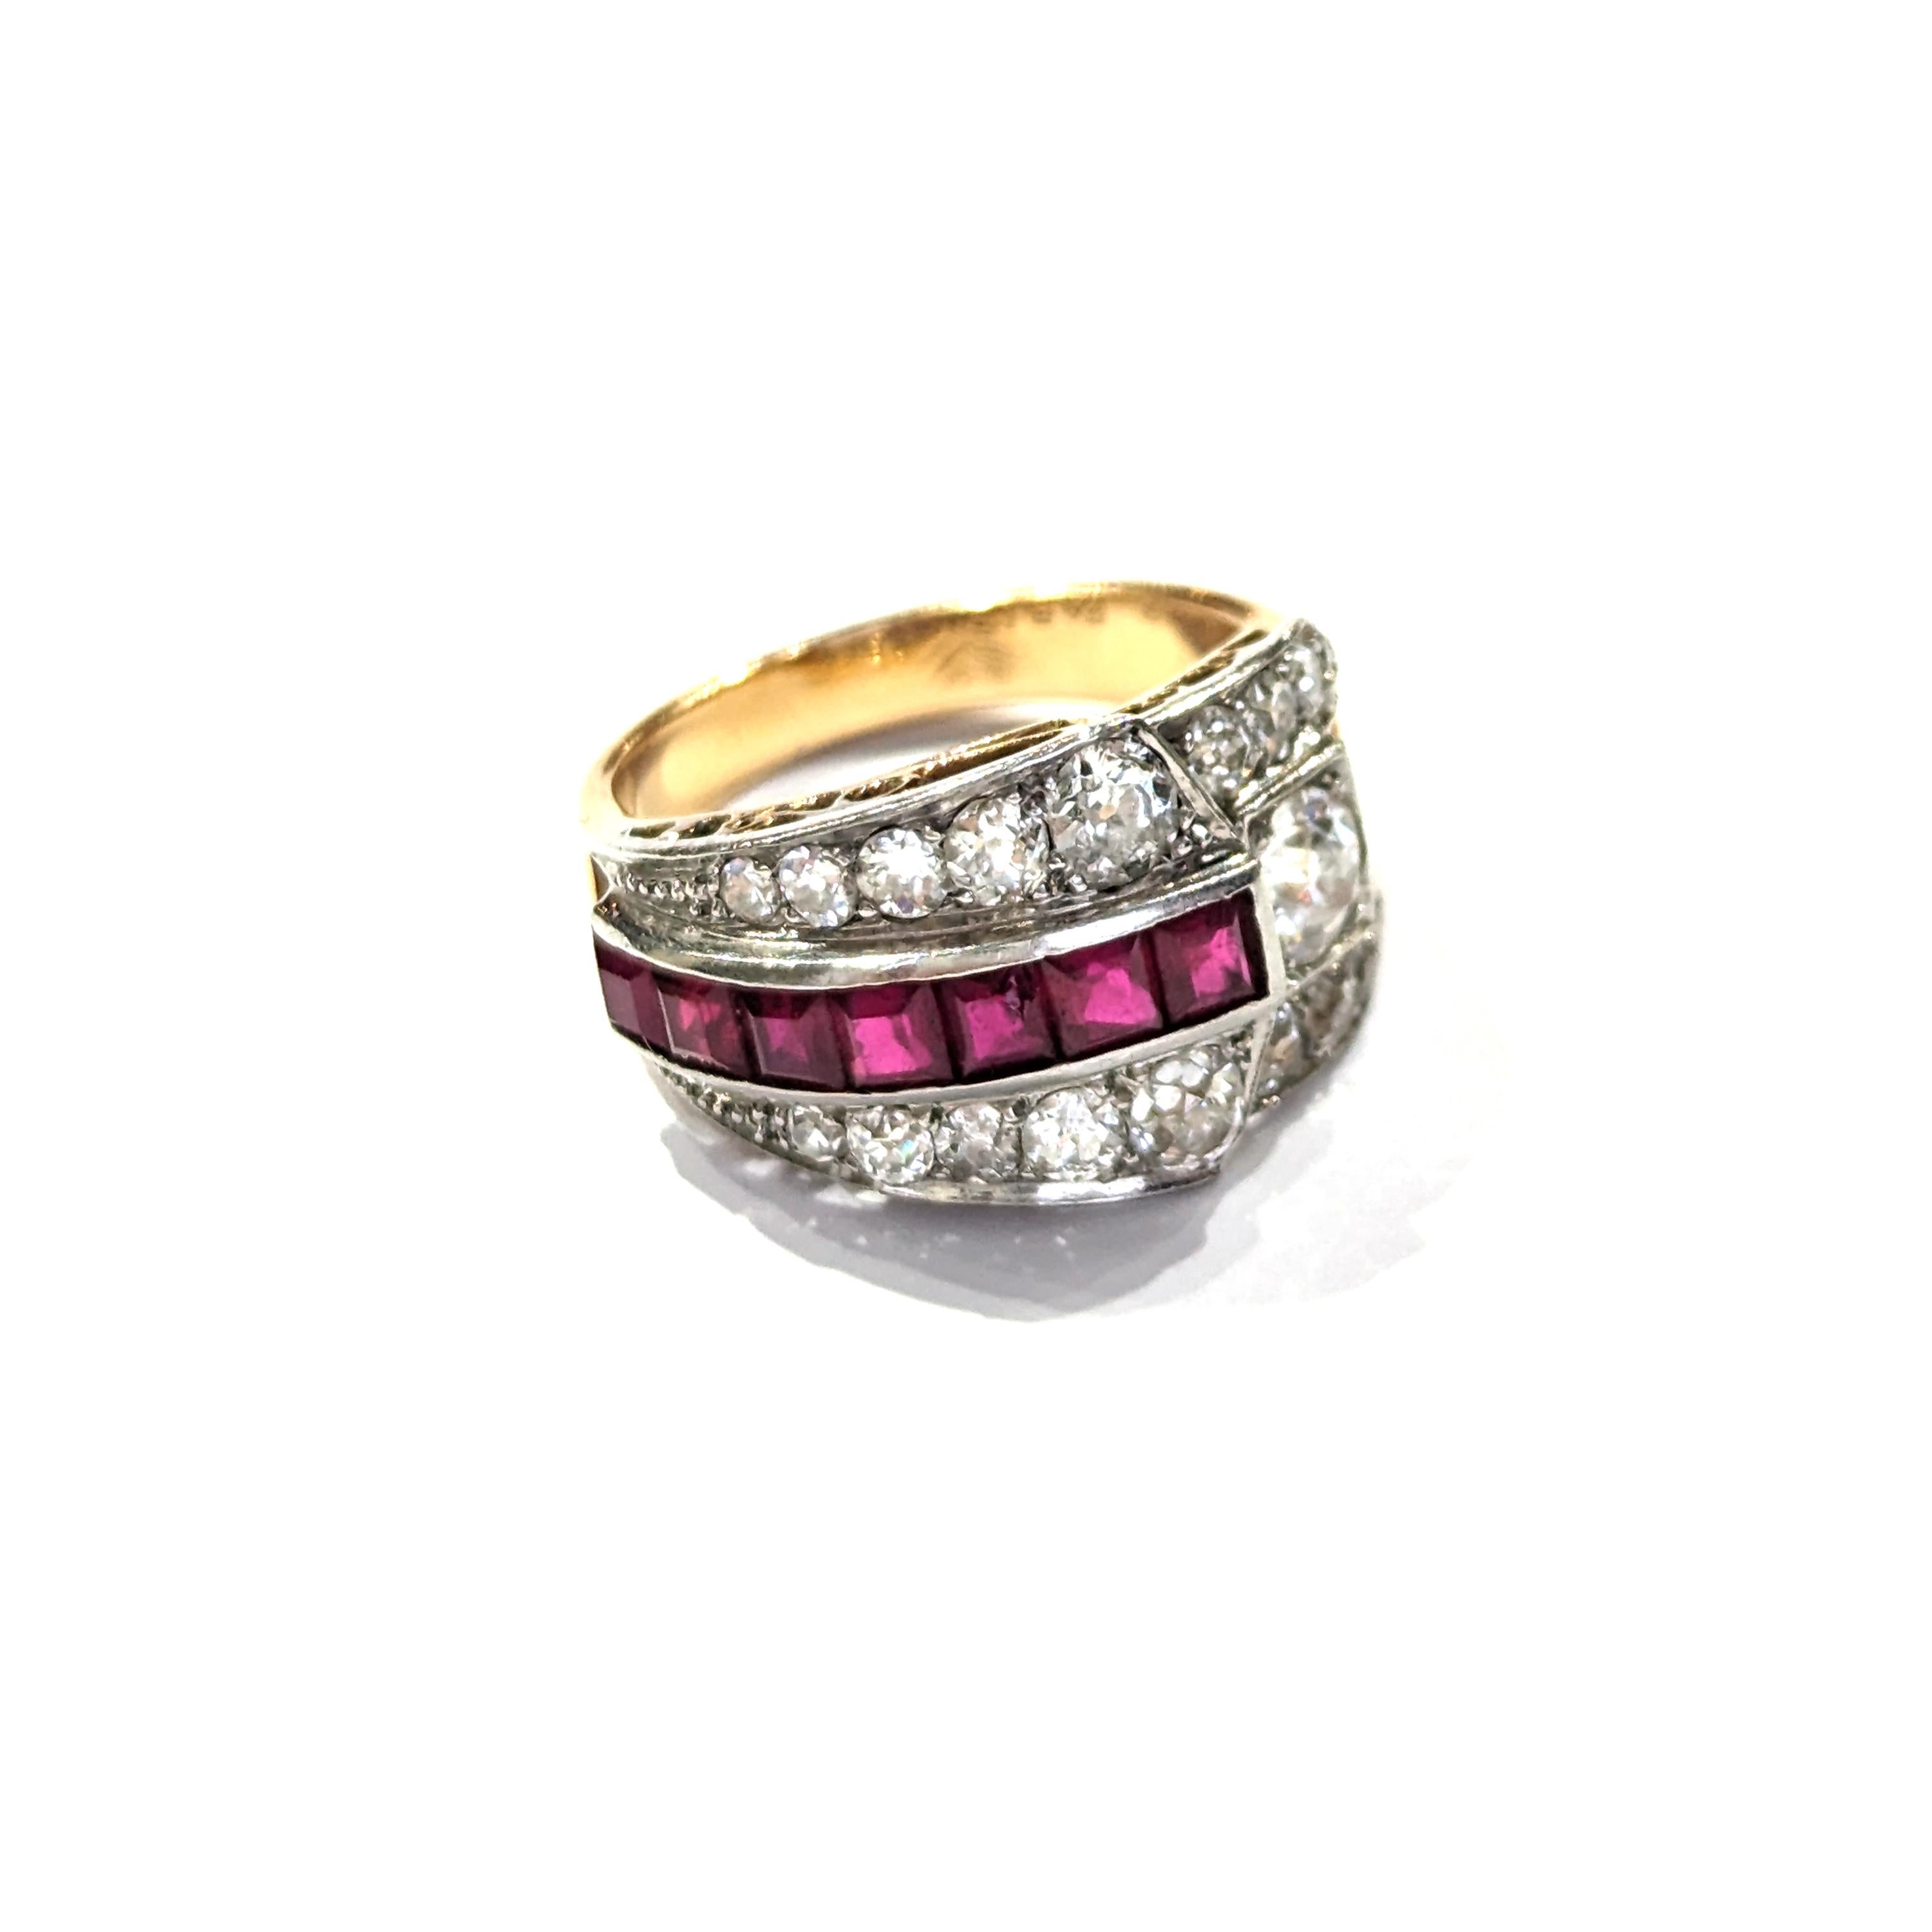 A.F. Souteyrand French Art Deco Ruby Diamond Platinum and Gold Ring, Circa 1935 For Sale 1